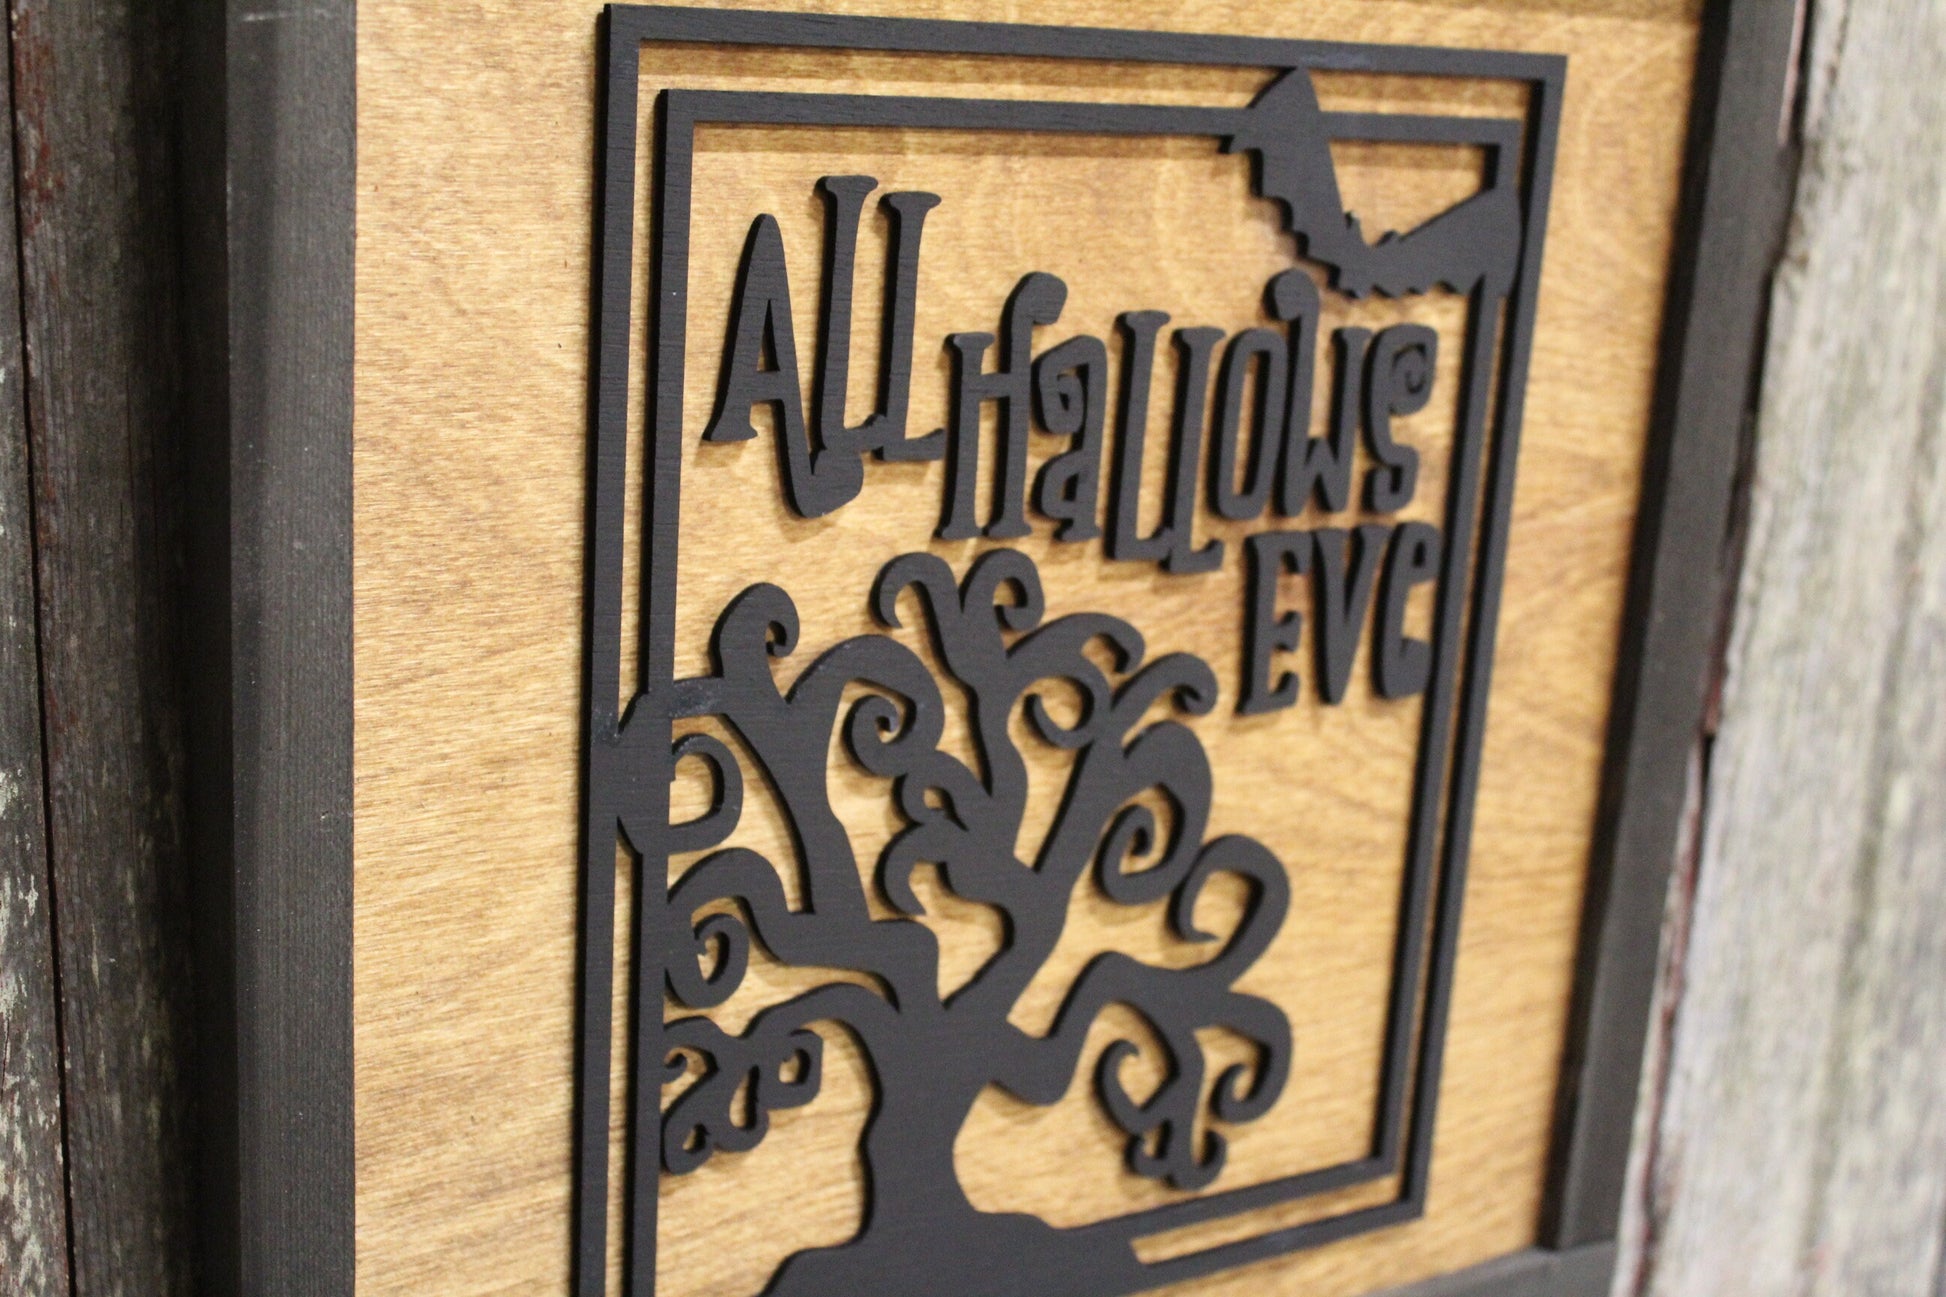 All Hallows Eve Wood Sign 3D Raised Text Script Halloween Fall Tree Bat Spooky Country Primitive Framed Wall Hanging Decoration Porch Decor